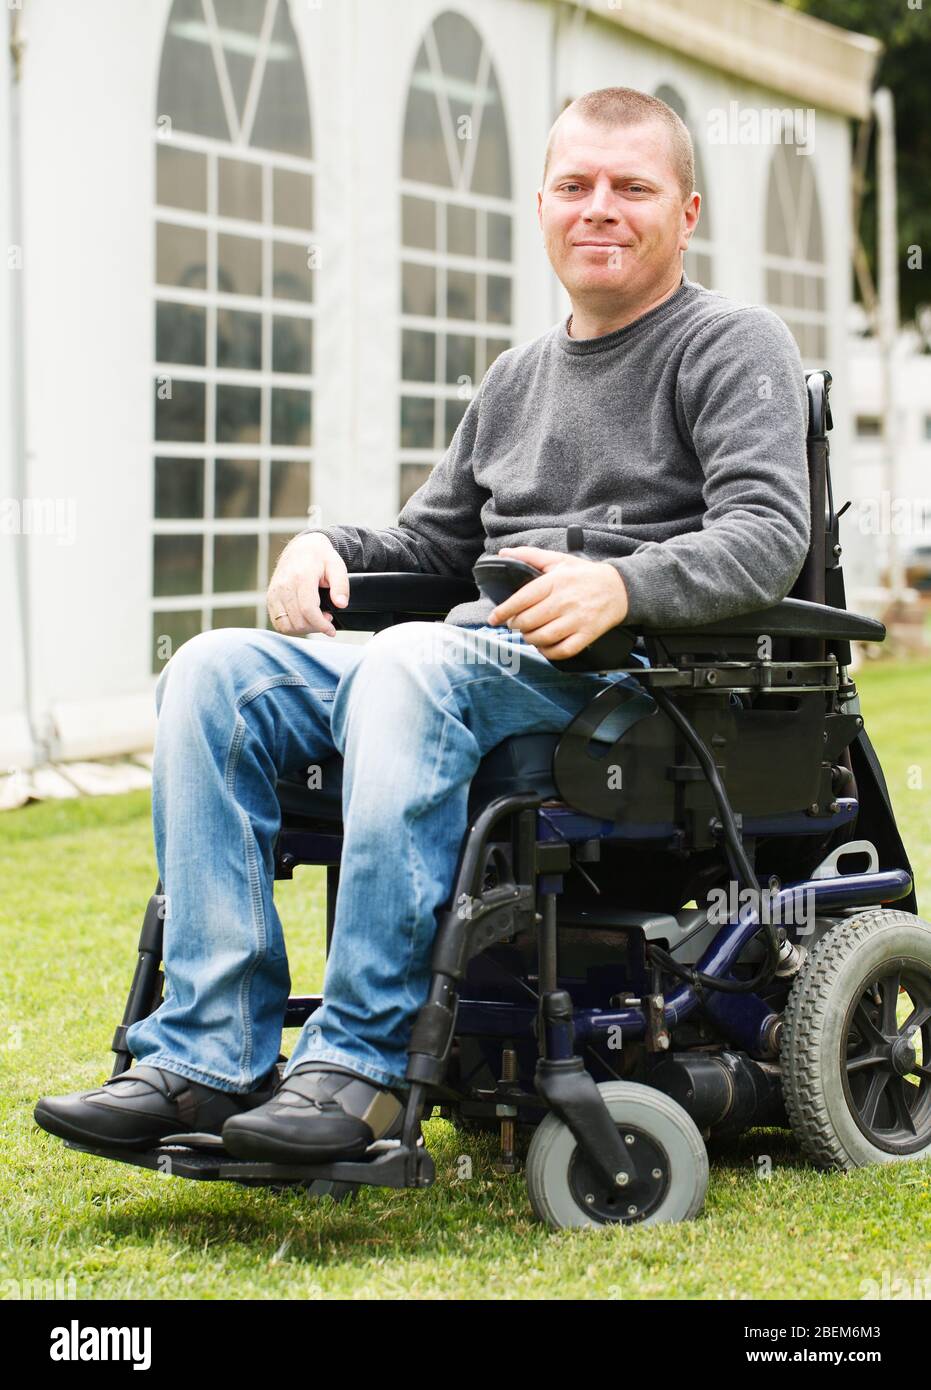 Disabled men smiling in a wheelchair Stock Photo